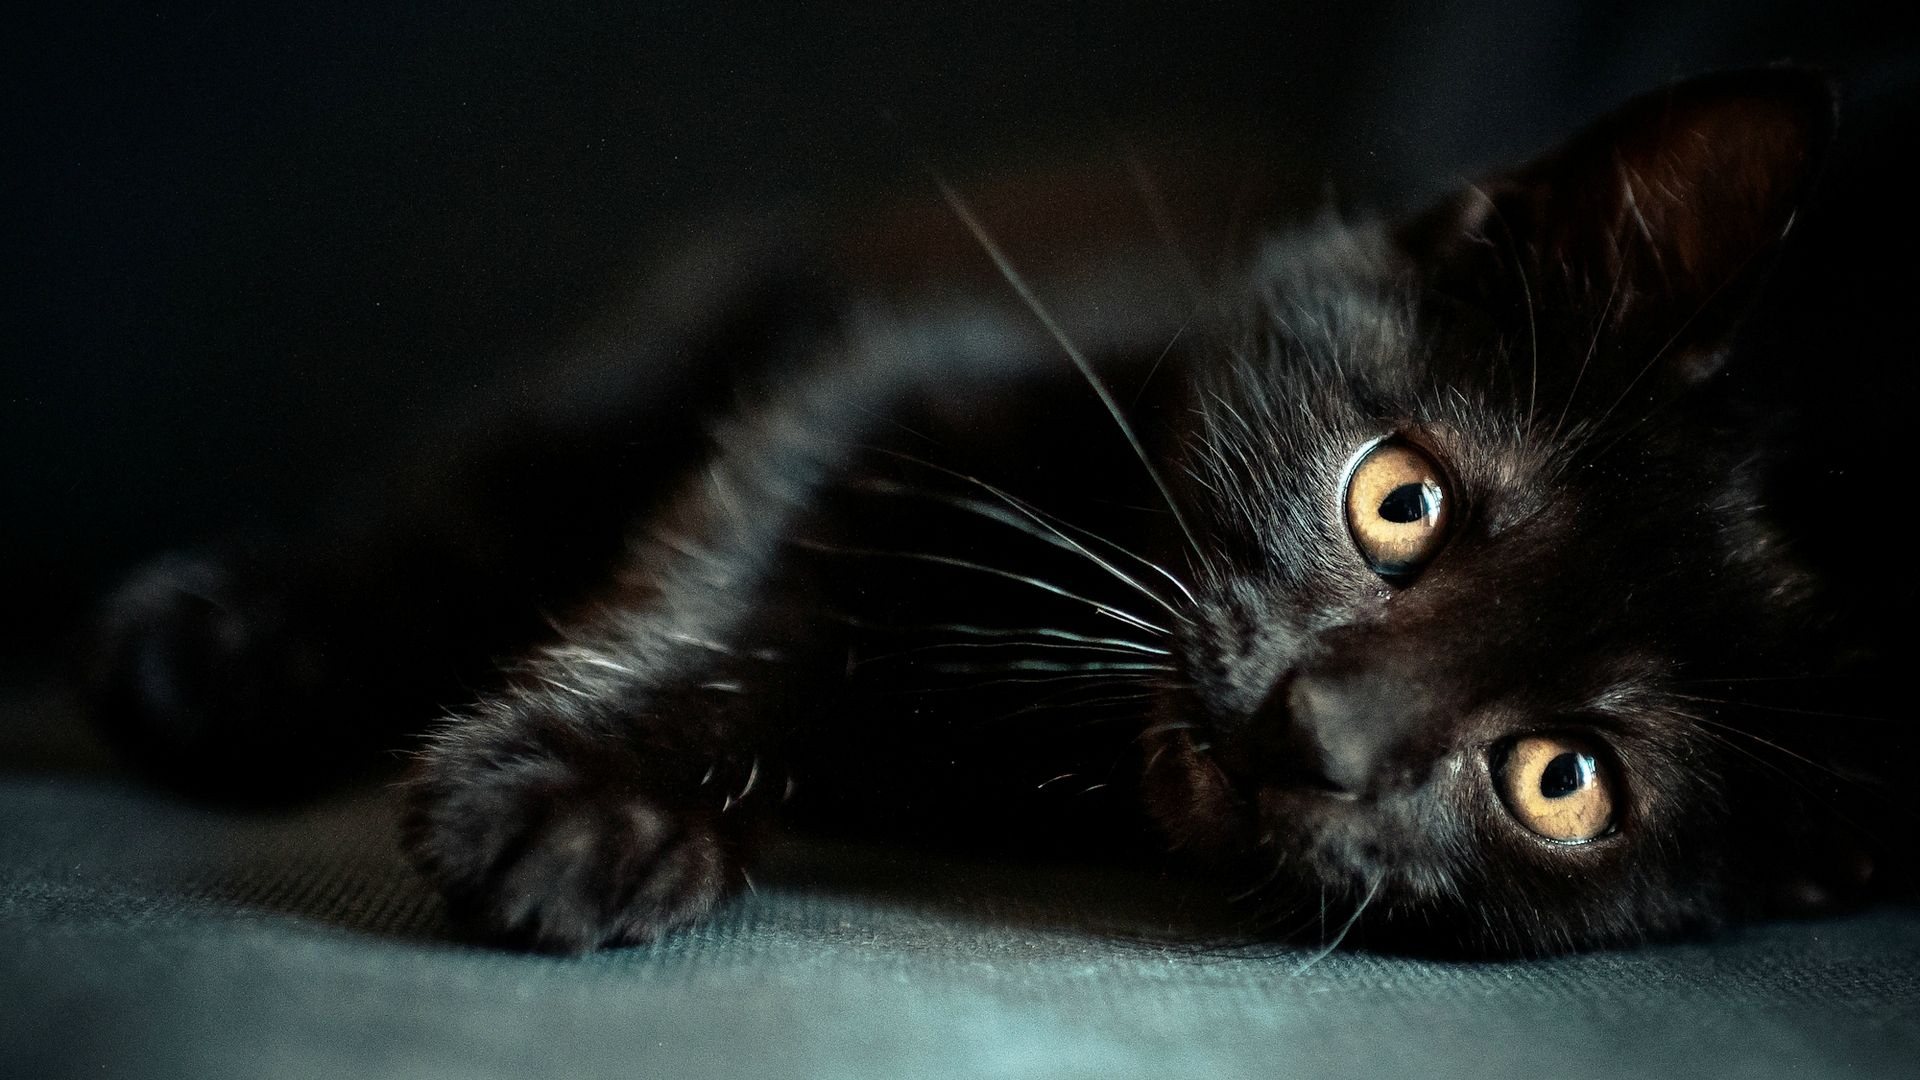 Black Cat Lying on Green Textile. Wallpaper in 1920x1080 Resolution